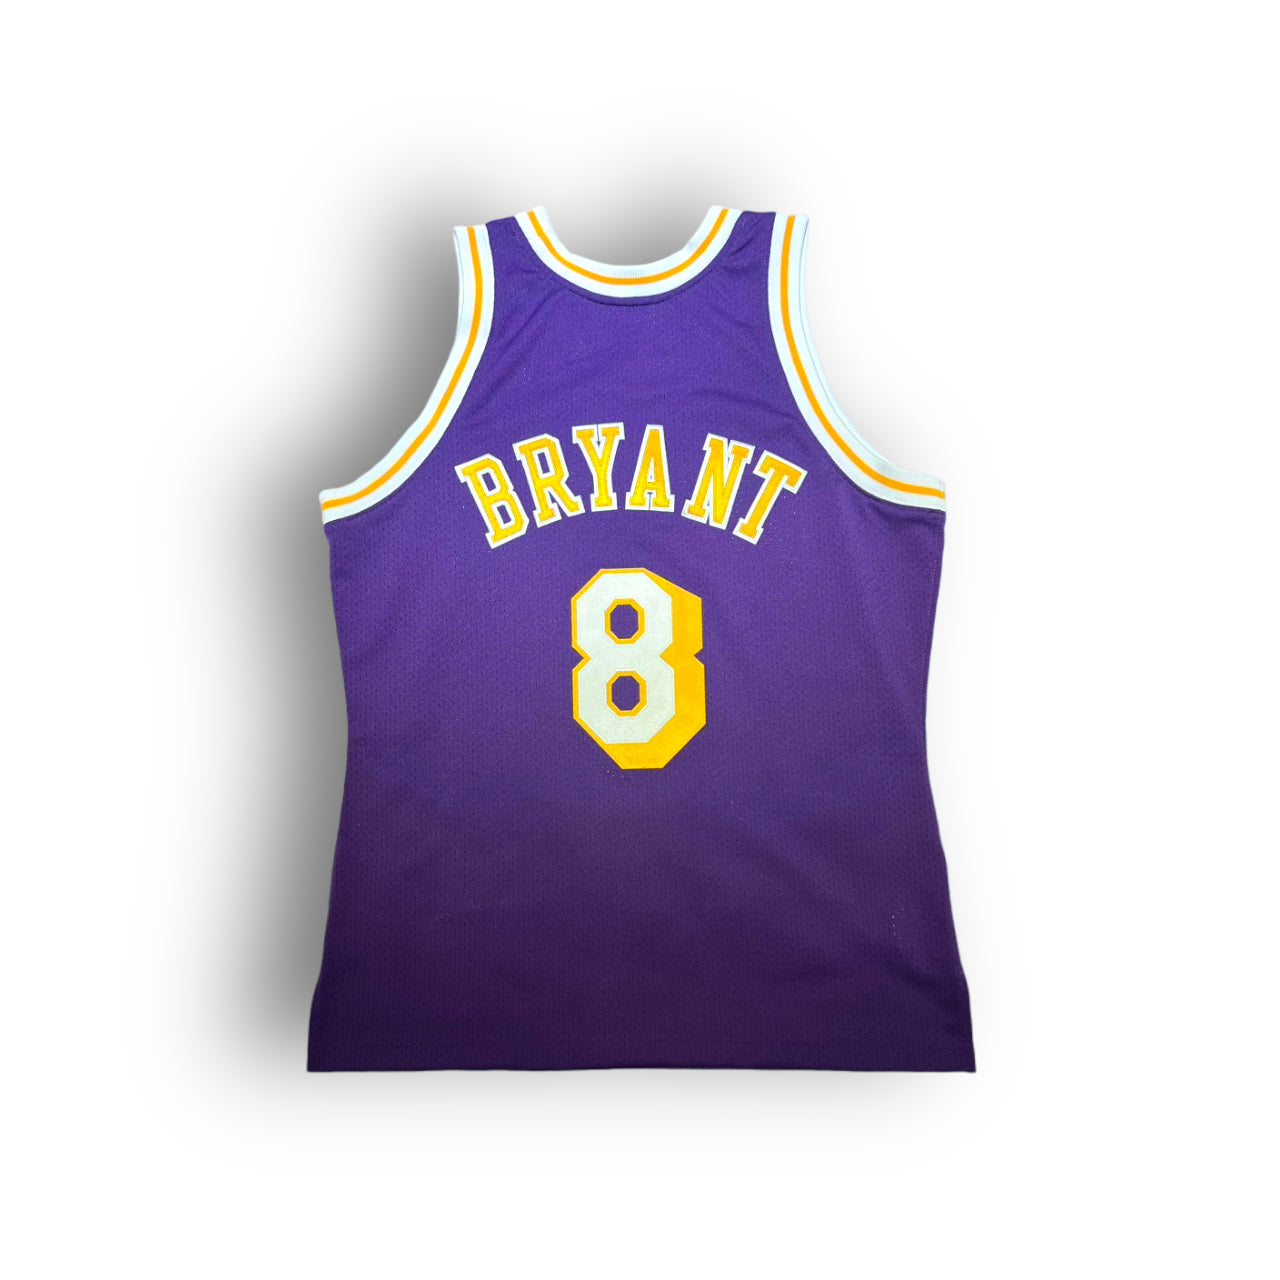 Mitchell and Ness Kobe Bryant Los Angeles Lakers 1996-1997 Rookie Season Away Authentic Jersey - Purple #8 - Hoop Jersey Store